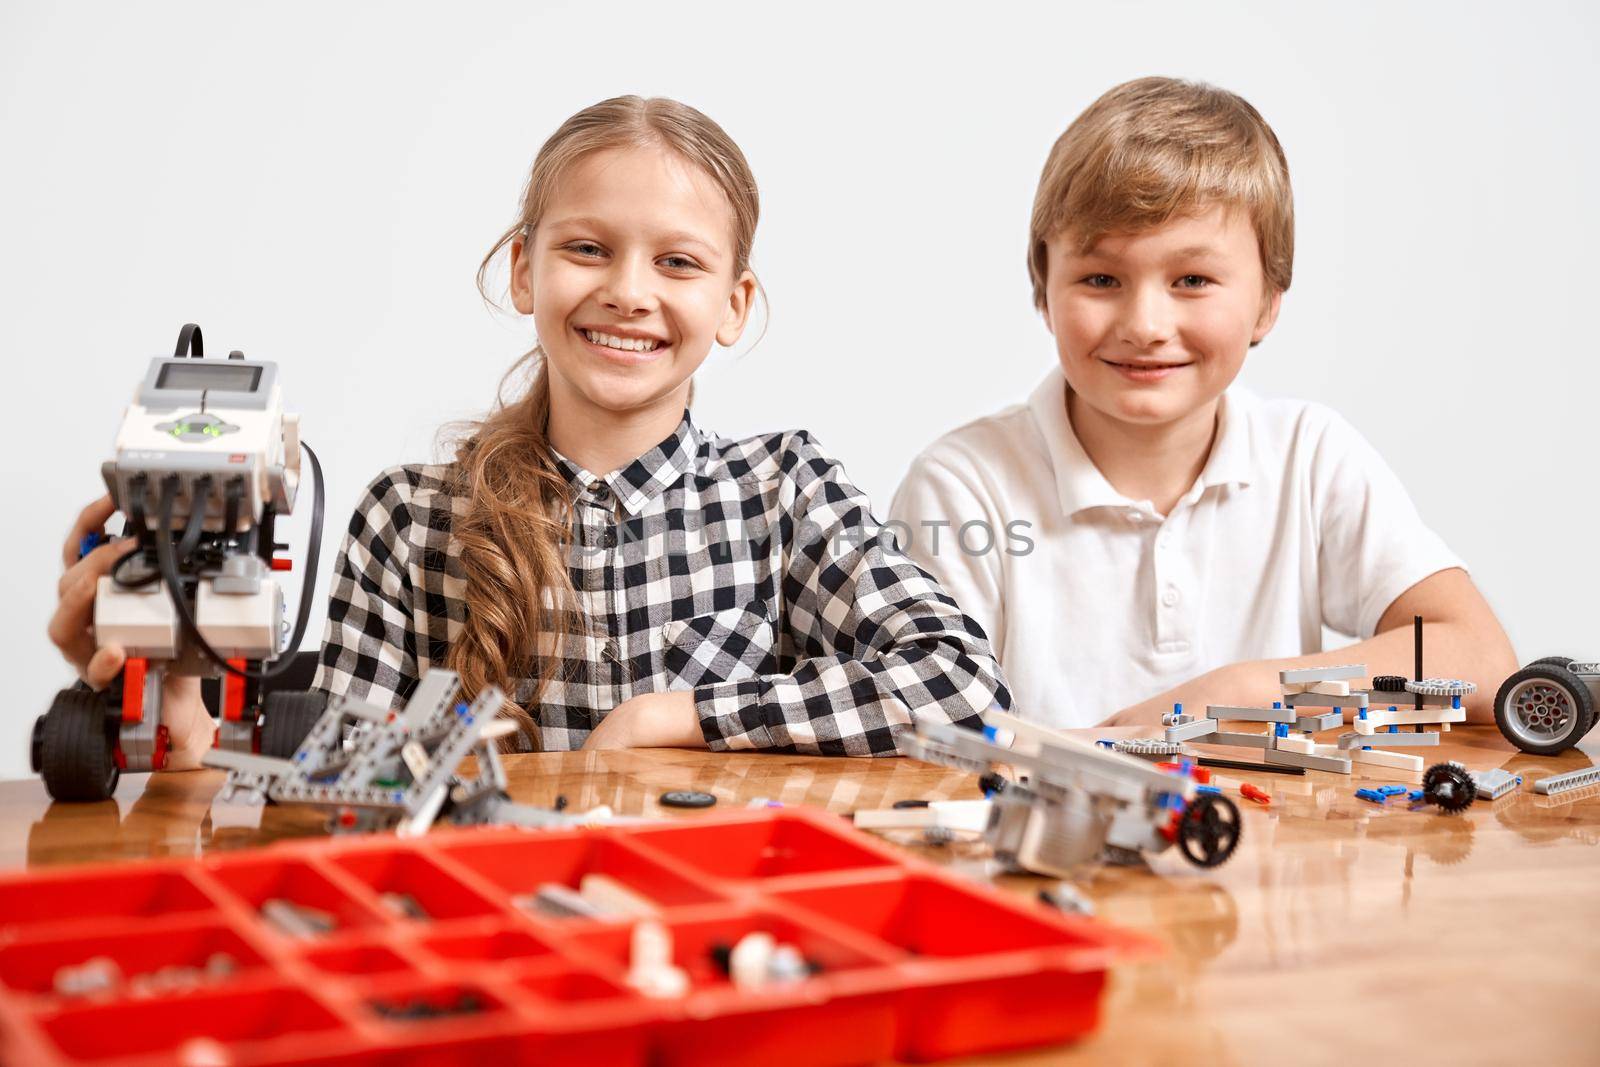 Front view of boy and girl creating robot, red box with building kit on table. Nice interested friends smiling, lookig at camera and working on project together. Concept of science engineering.